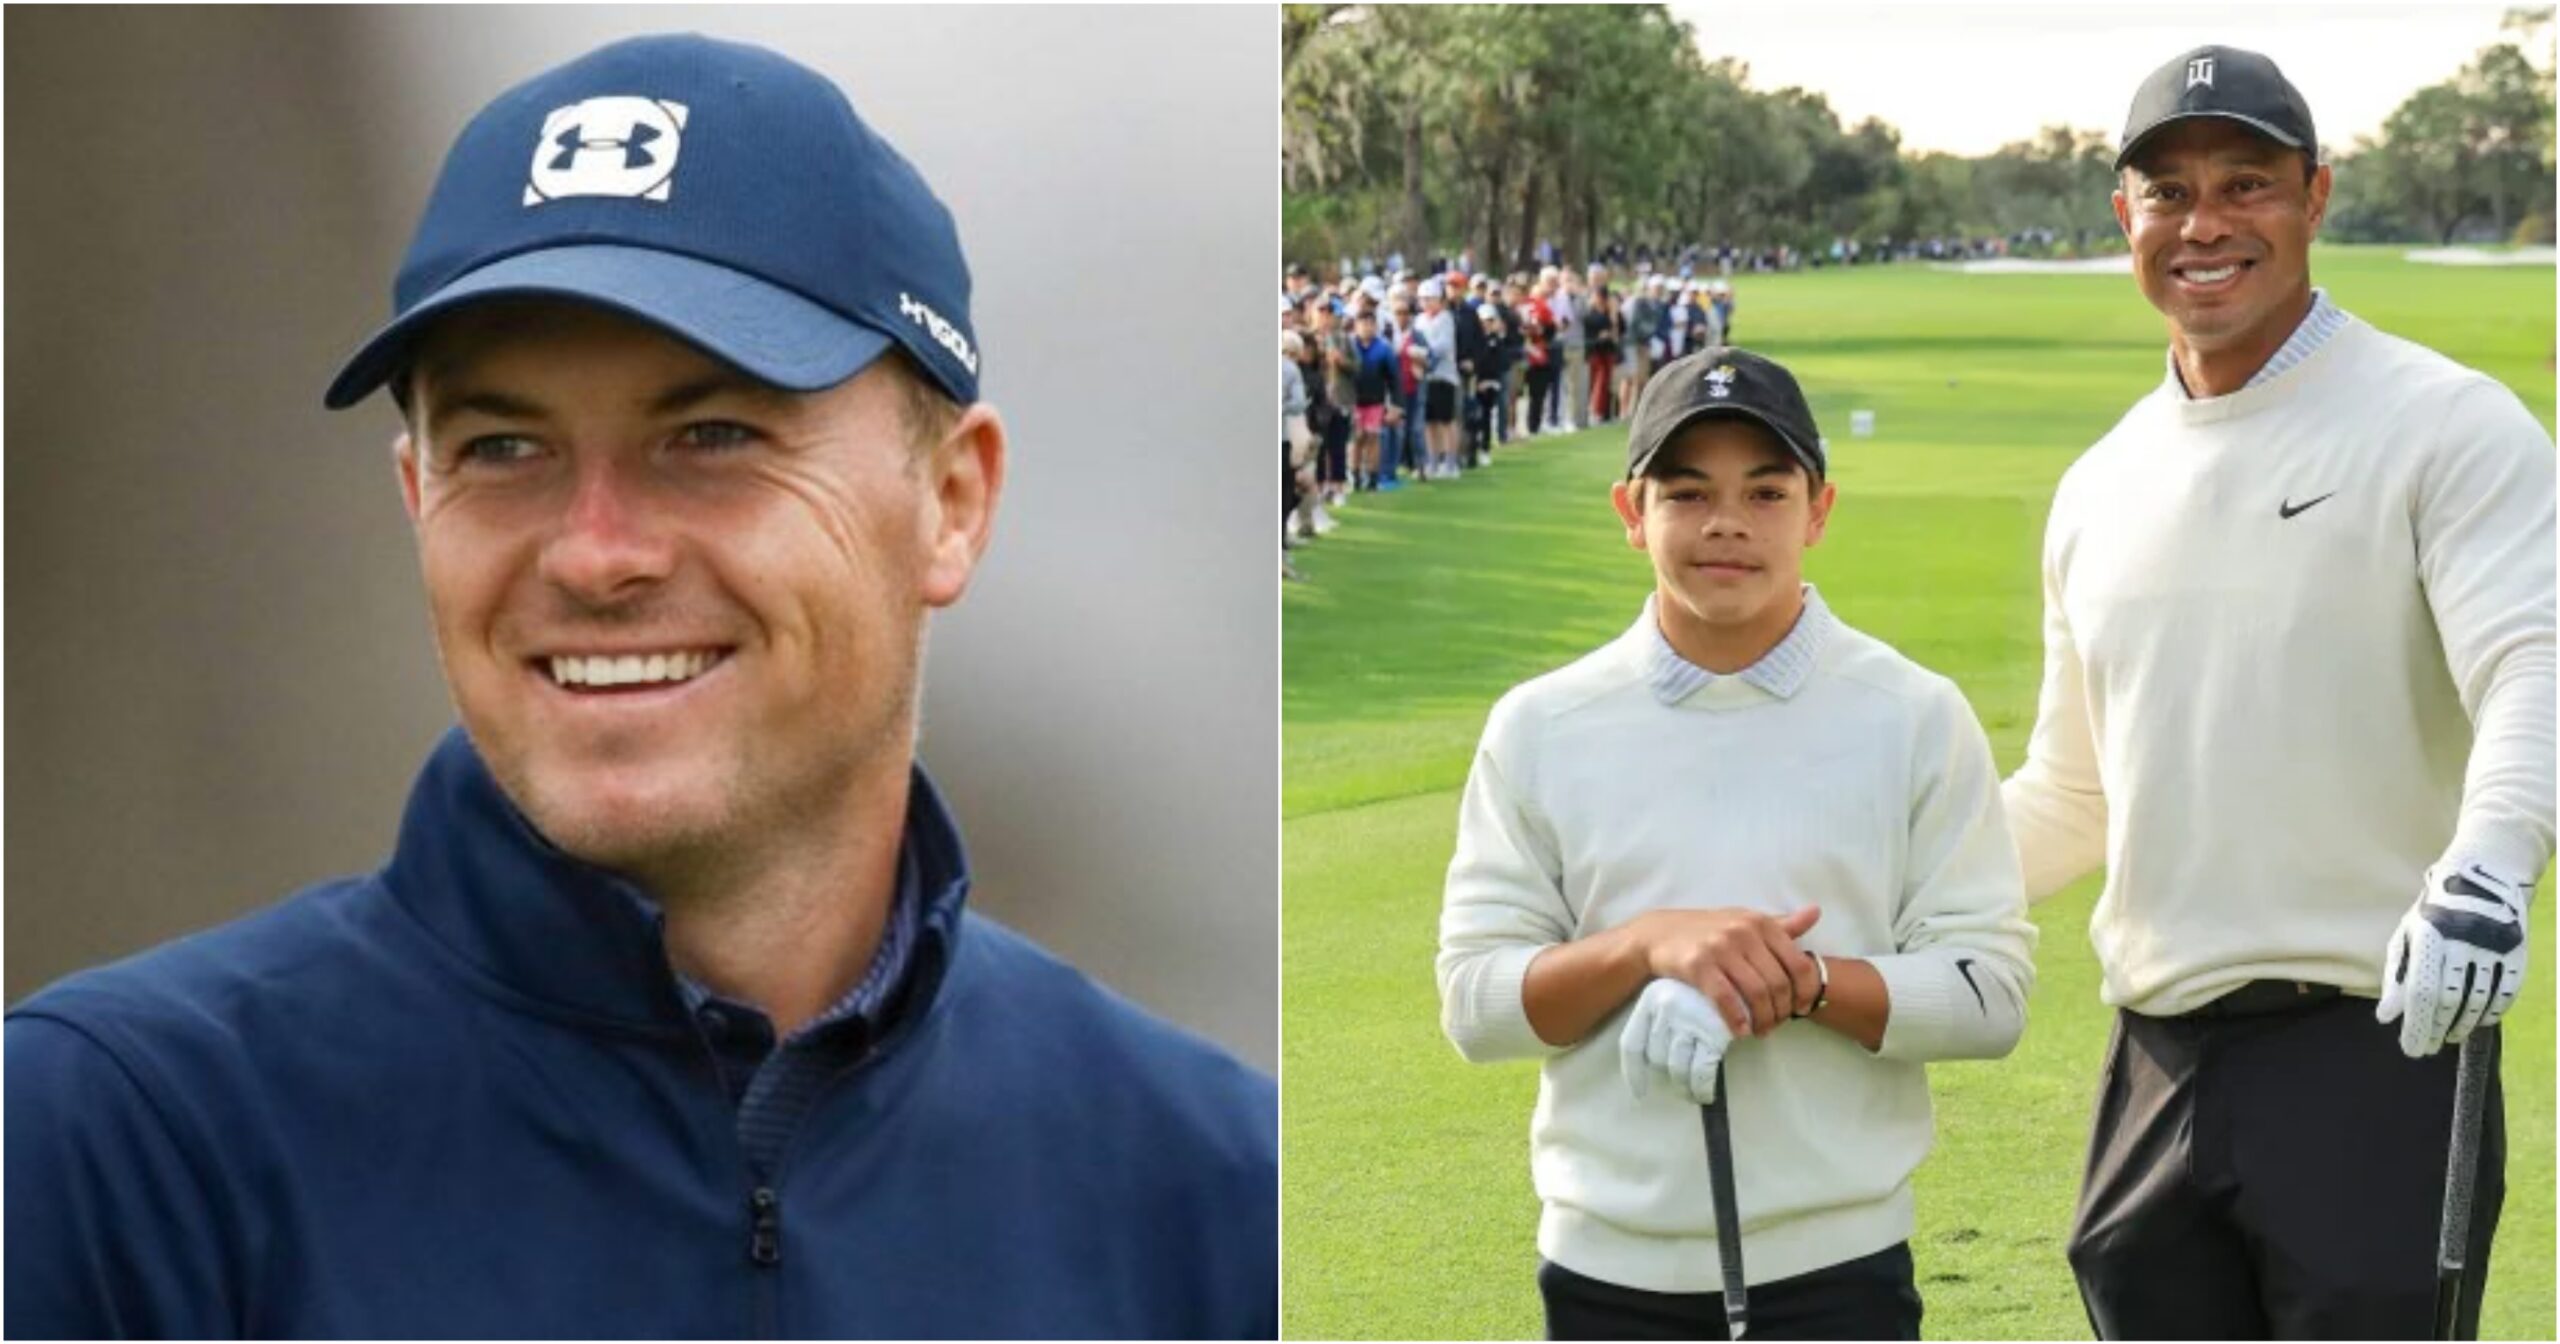 Masters 2024: Spieth’s un-millennial comment, Charlie Woods’ bold move and 5 other superlatives from Tuesday’s press conference gauntlet.